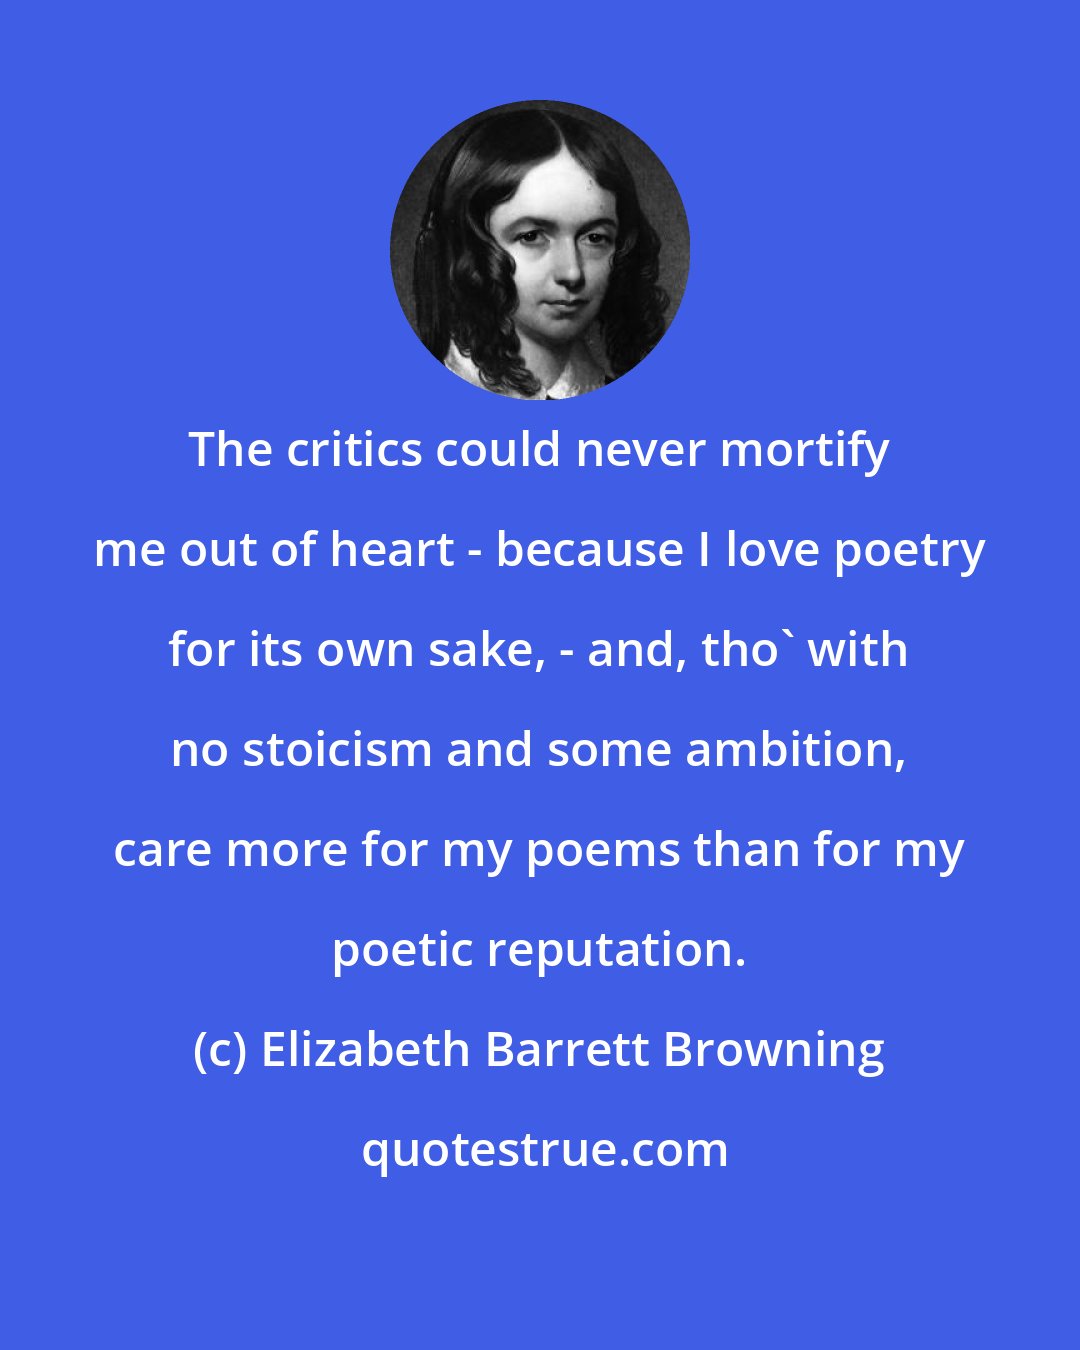 Elizabeth Barrett Browning: The critics could never mortify me out of heart - because I love poetry for its own sake, - and, tho' with no stoicism and some ambition, care more for my poems than for my poetic reputation.